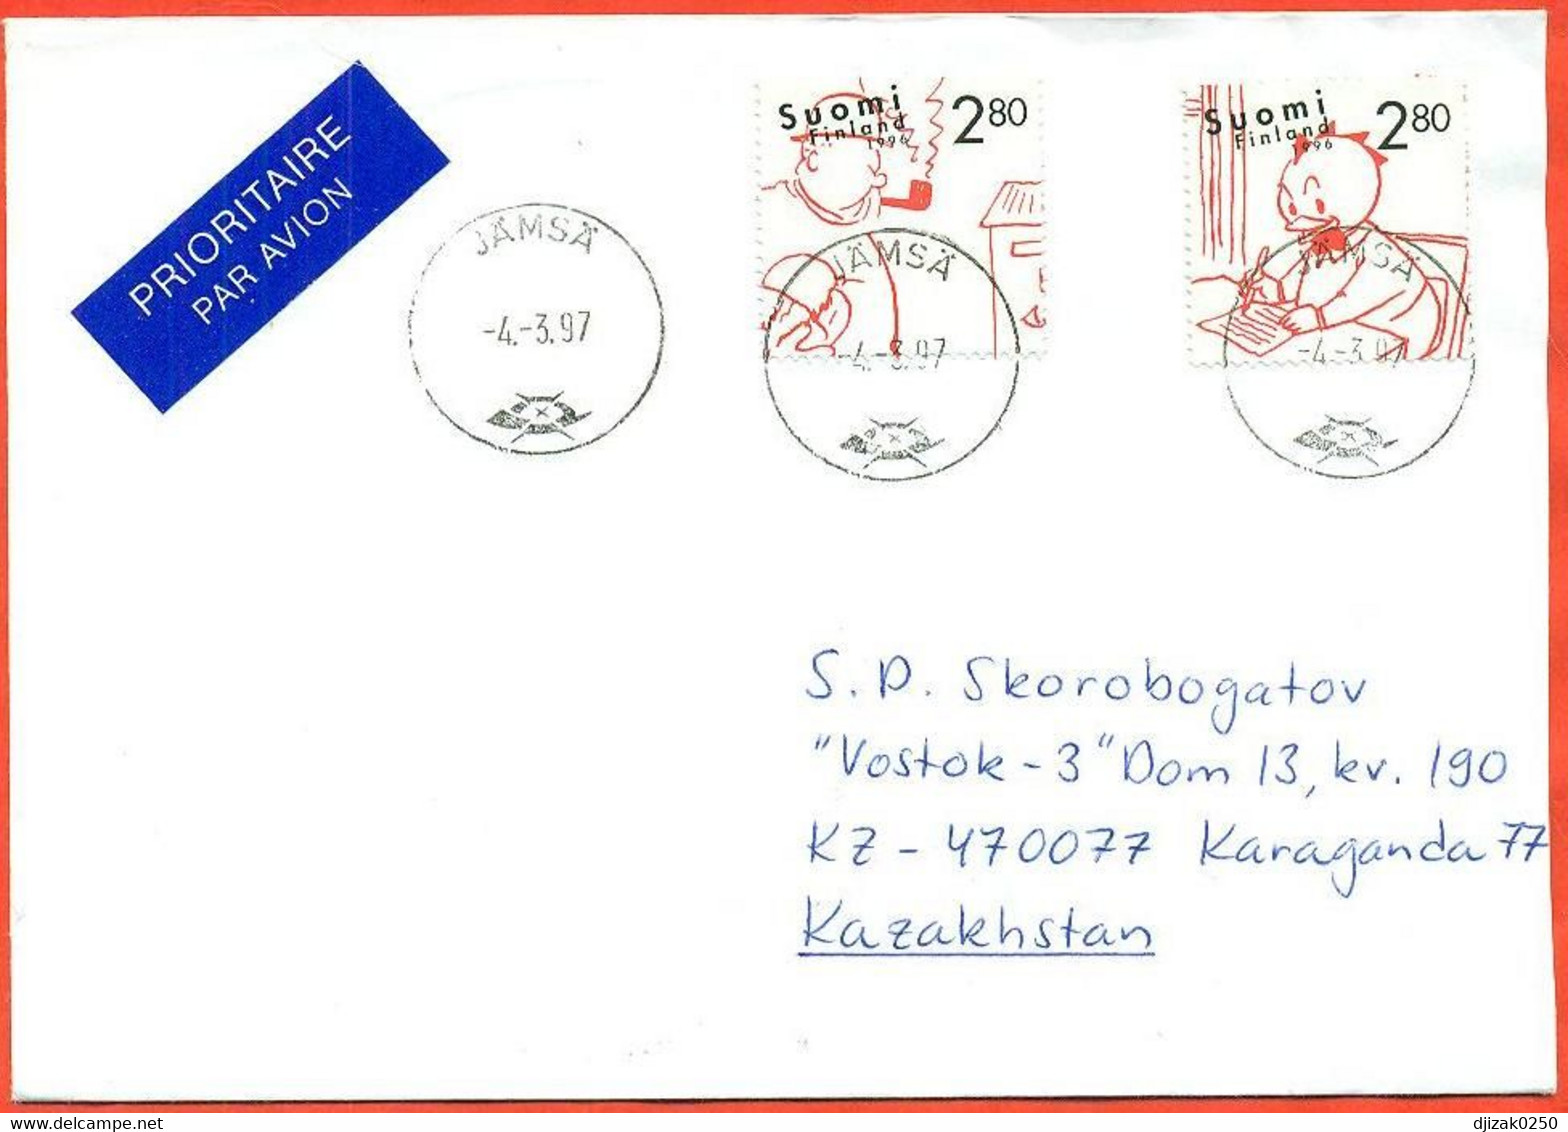 Finland 1997.The Envelope Passed Through The Mail. Airmail. - Cartas & Documentos